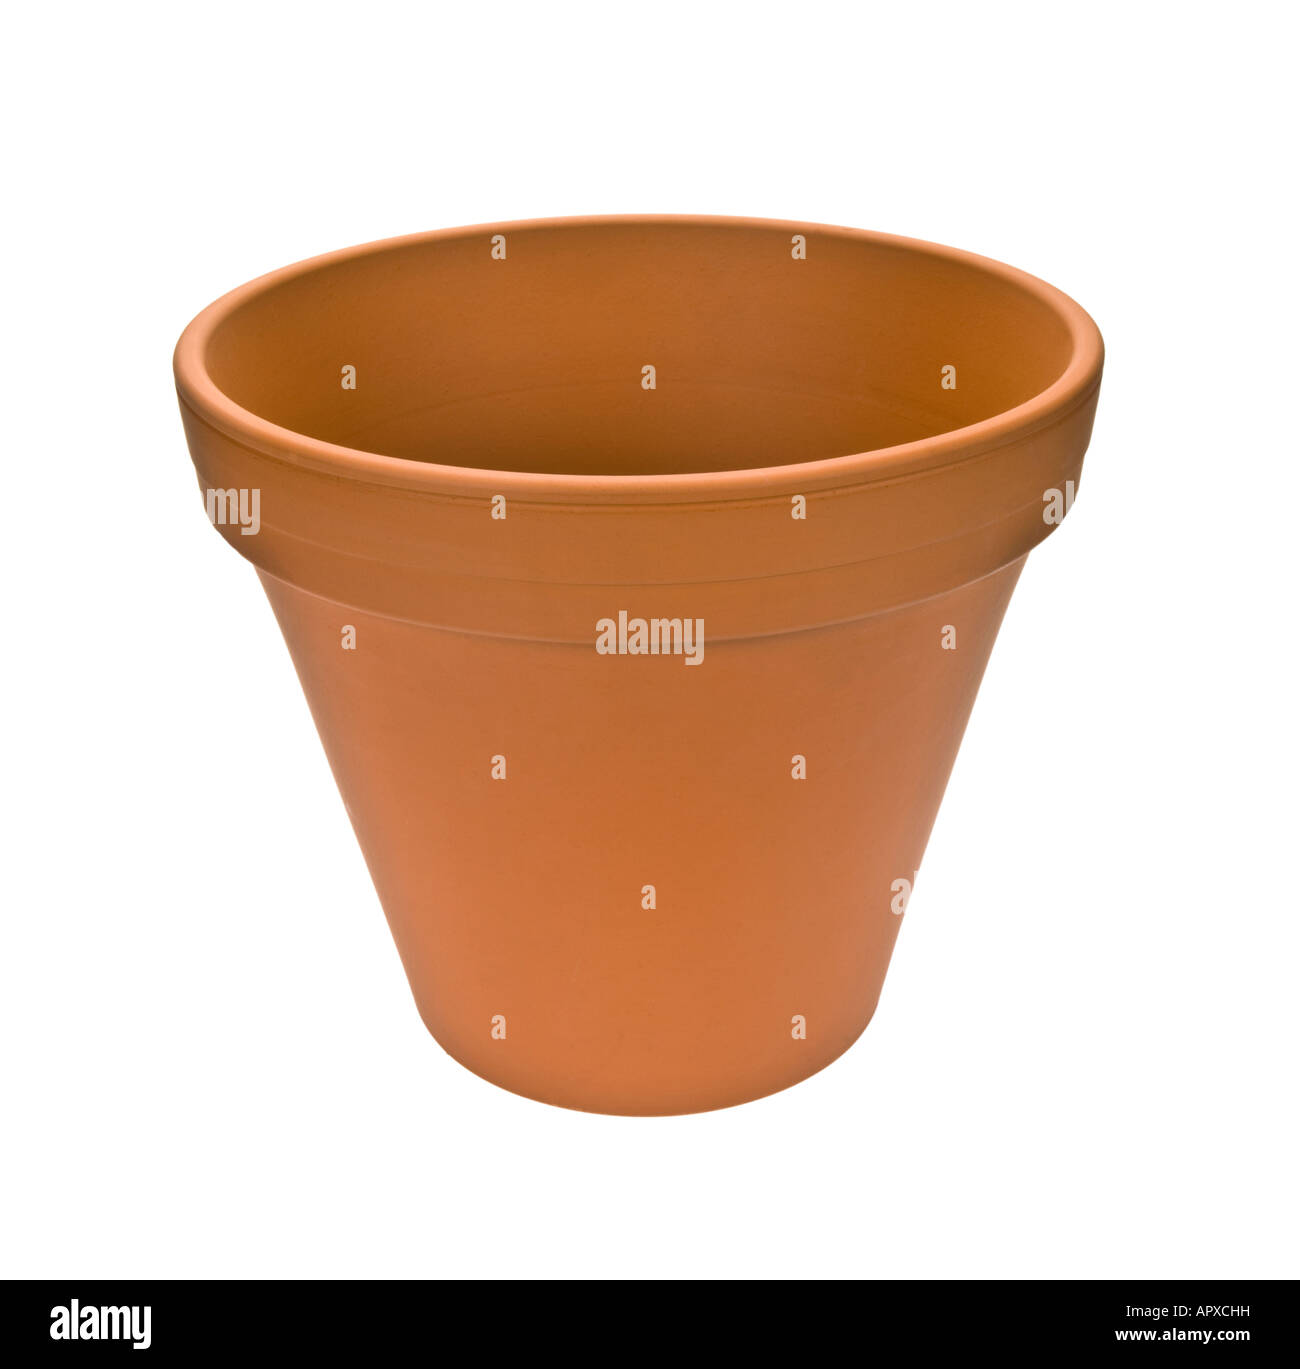 just flowerpot flower pot made of clay container brown yellow red earth